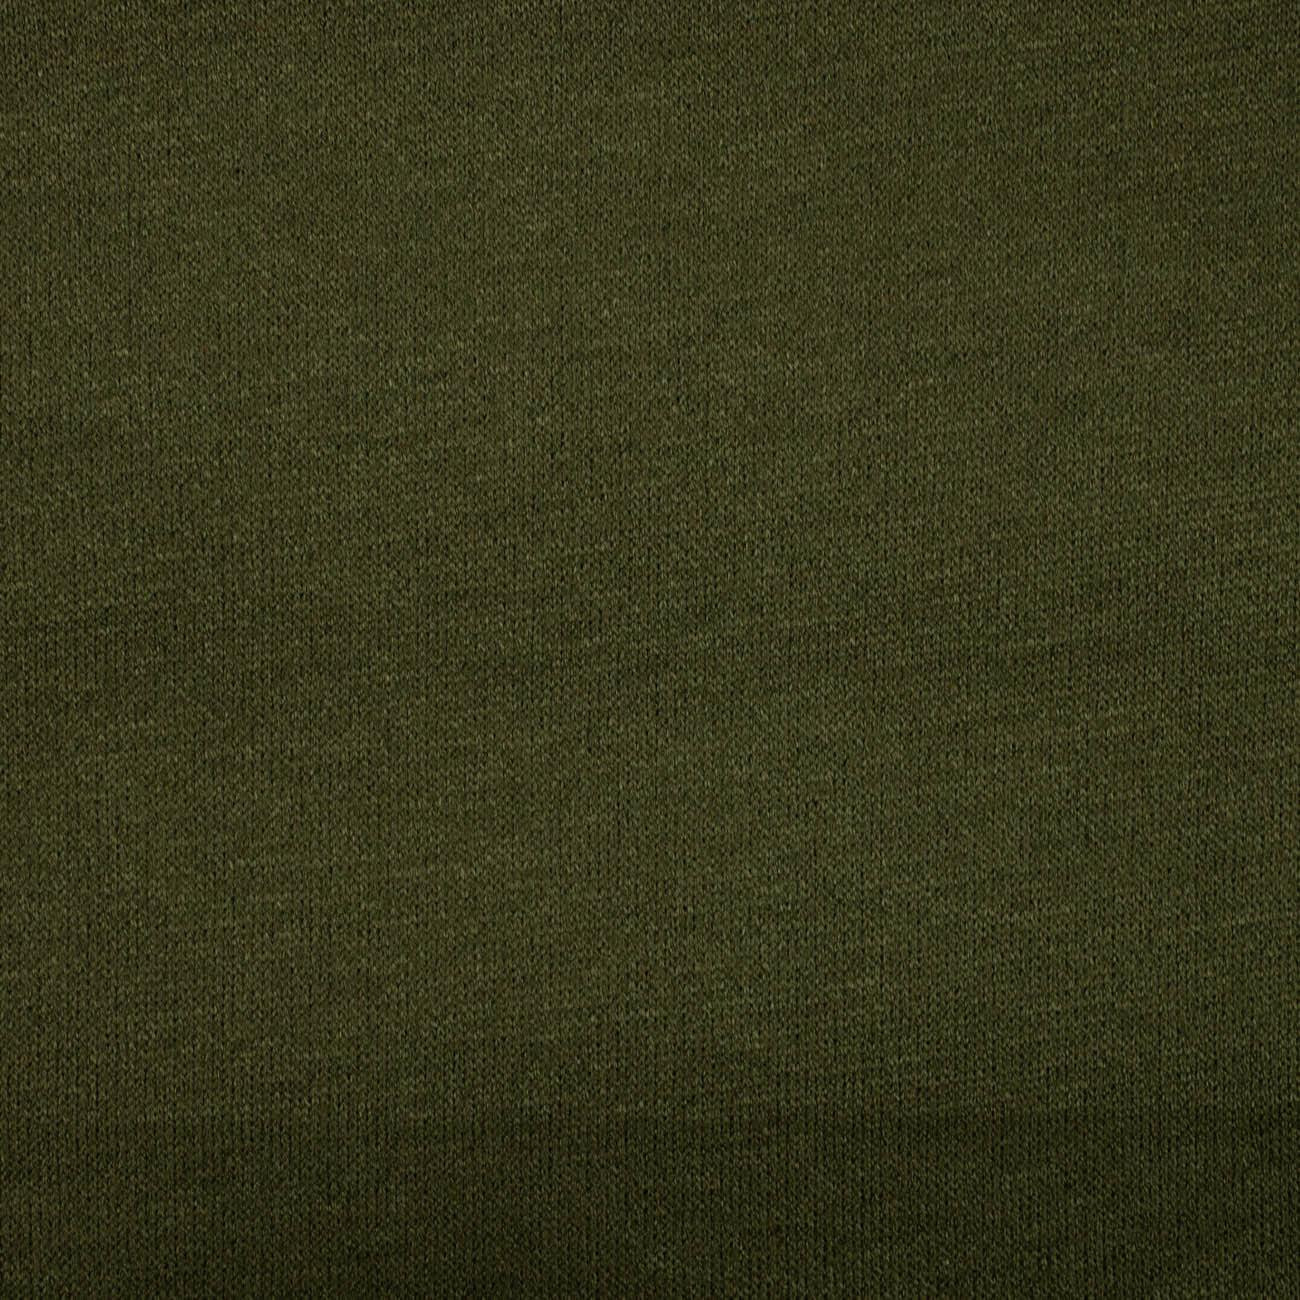 Olive - solid Sweater knit fabric